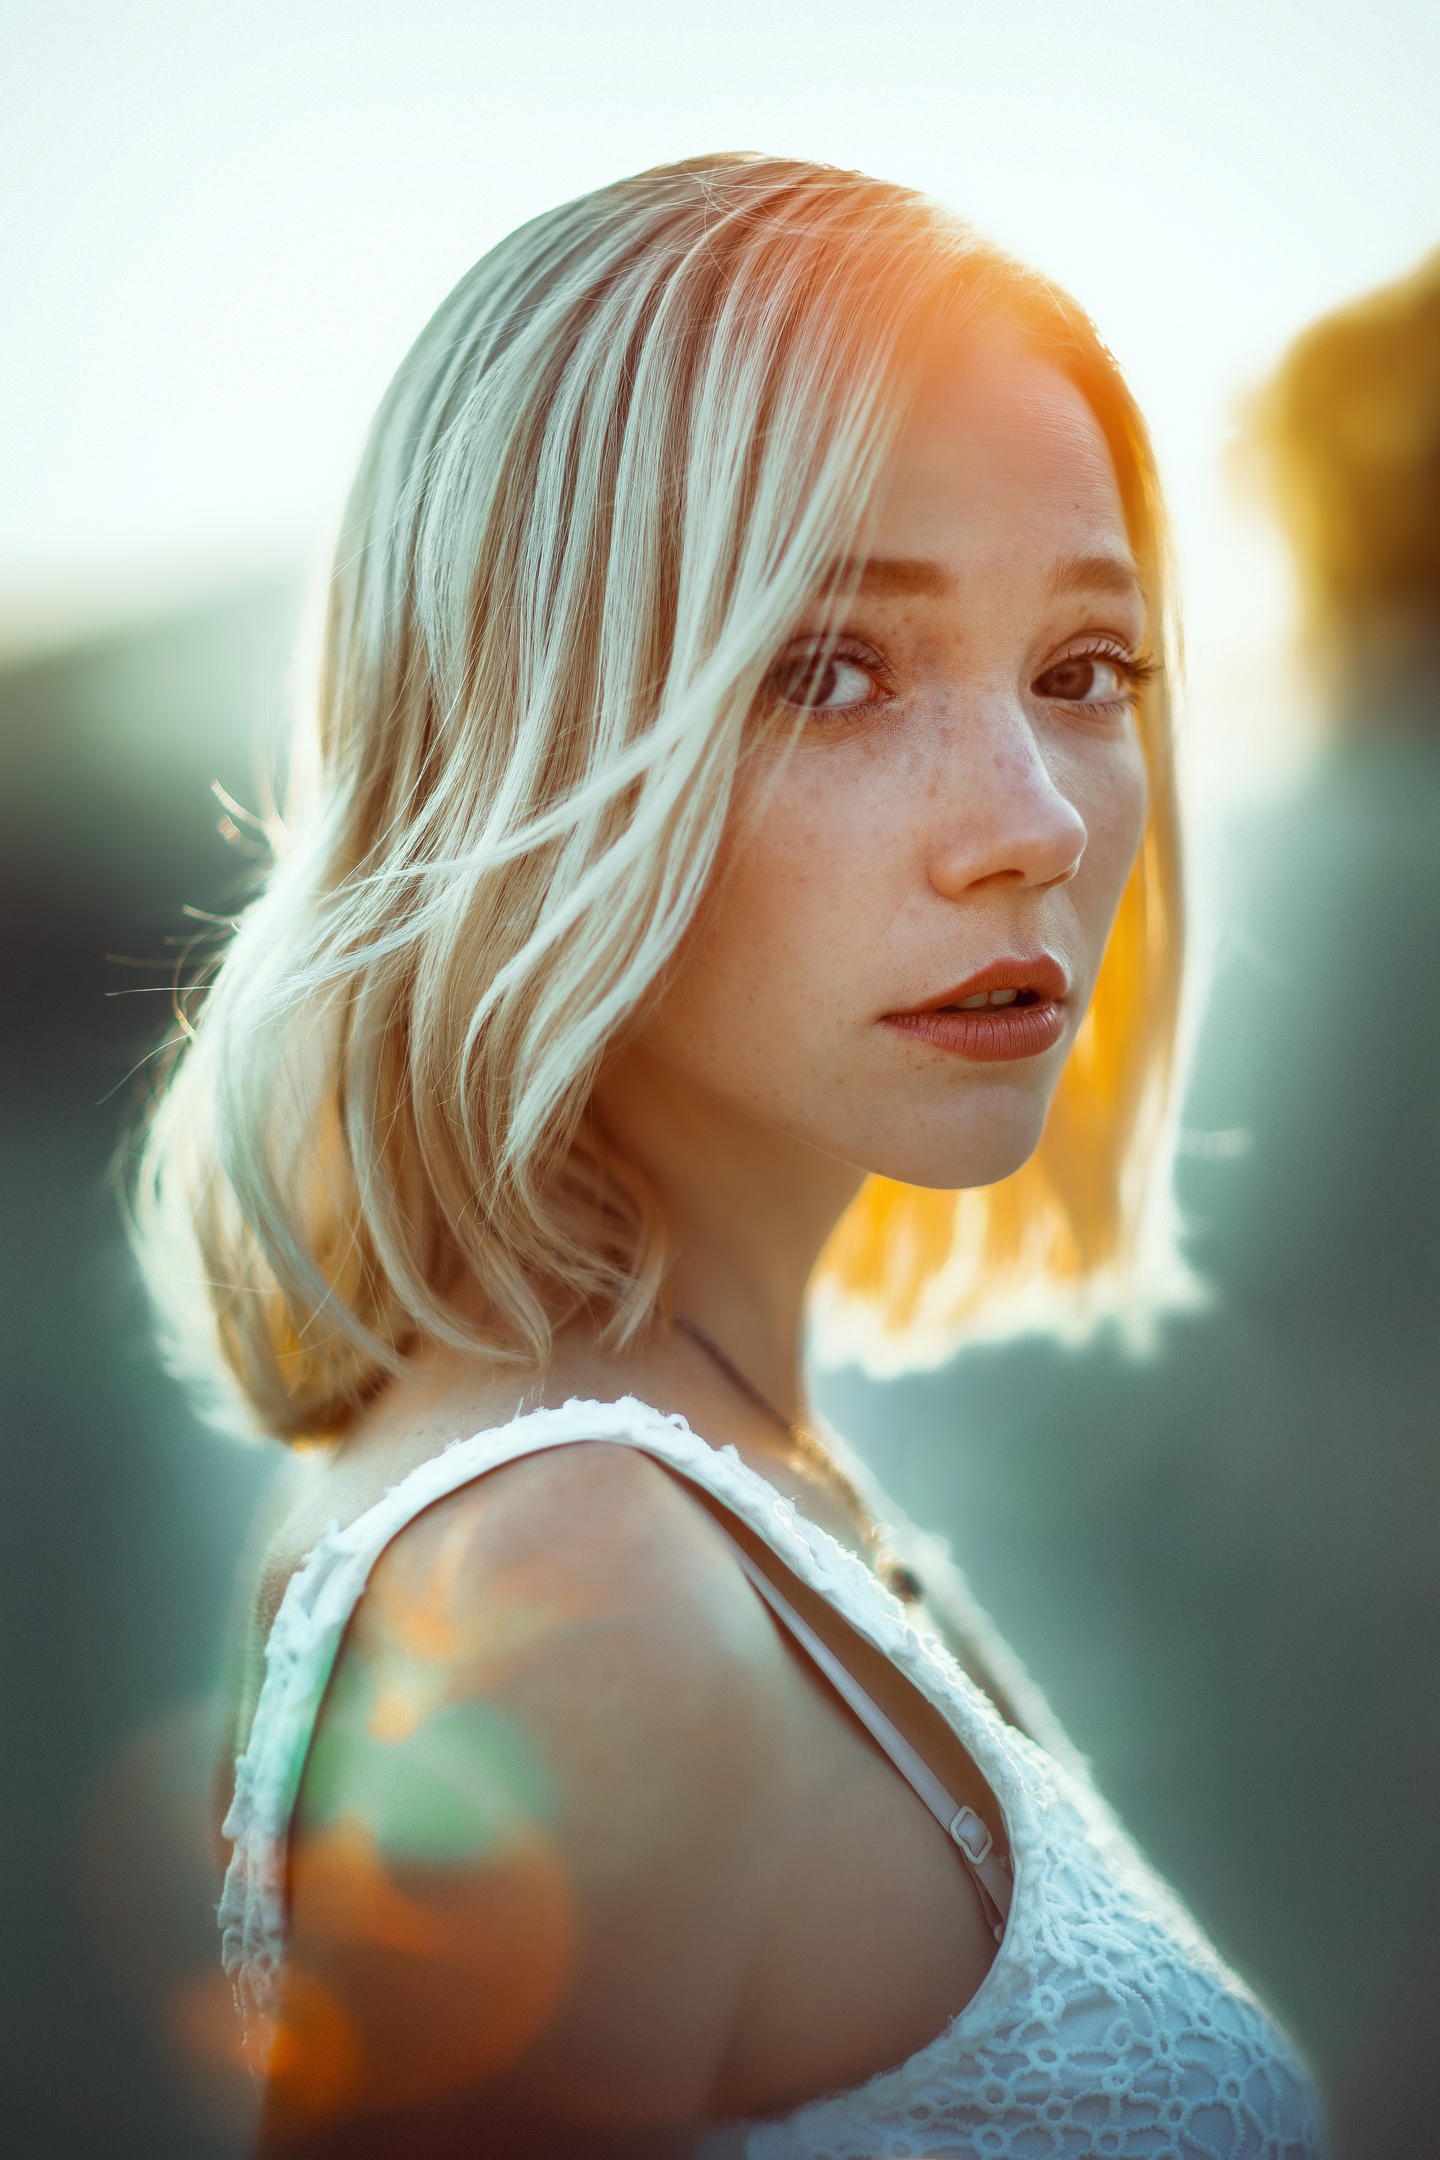 Women Model Blonde Portrait Looking At Viewer Outdoors Depth Of Field Sun Rays Sunset Face Shoulder  1440x2160